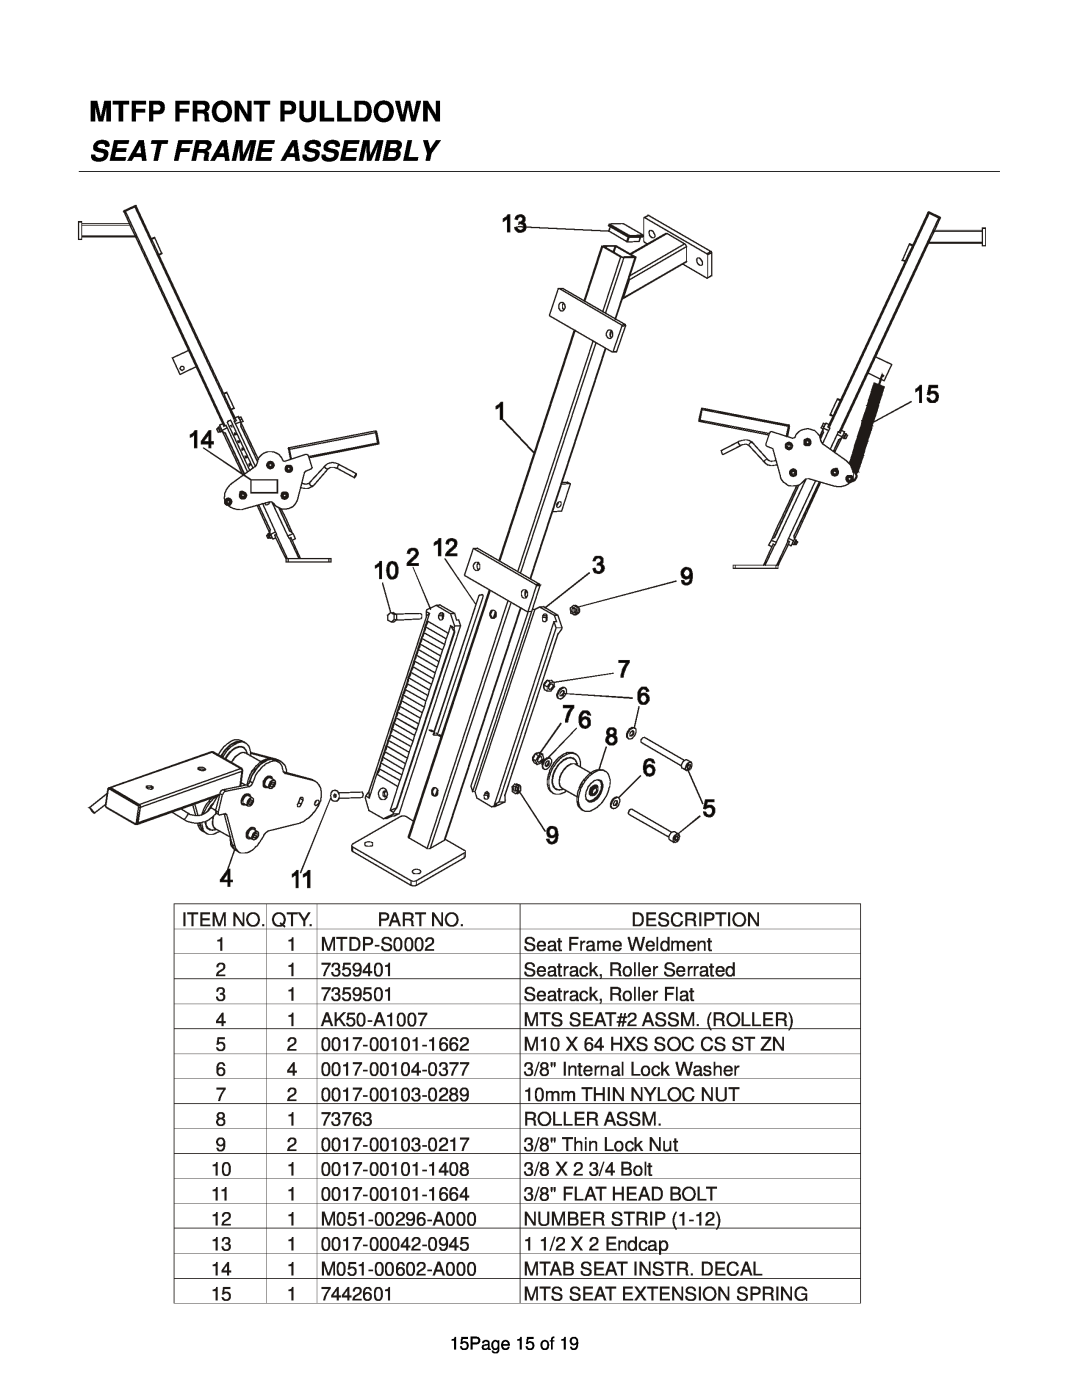 Life Fitness MTFP manual Seat Frame Assembly, Mtfp Front Pulldown 